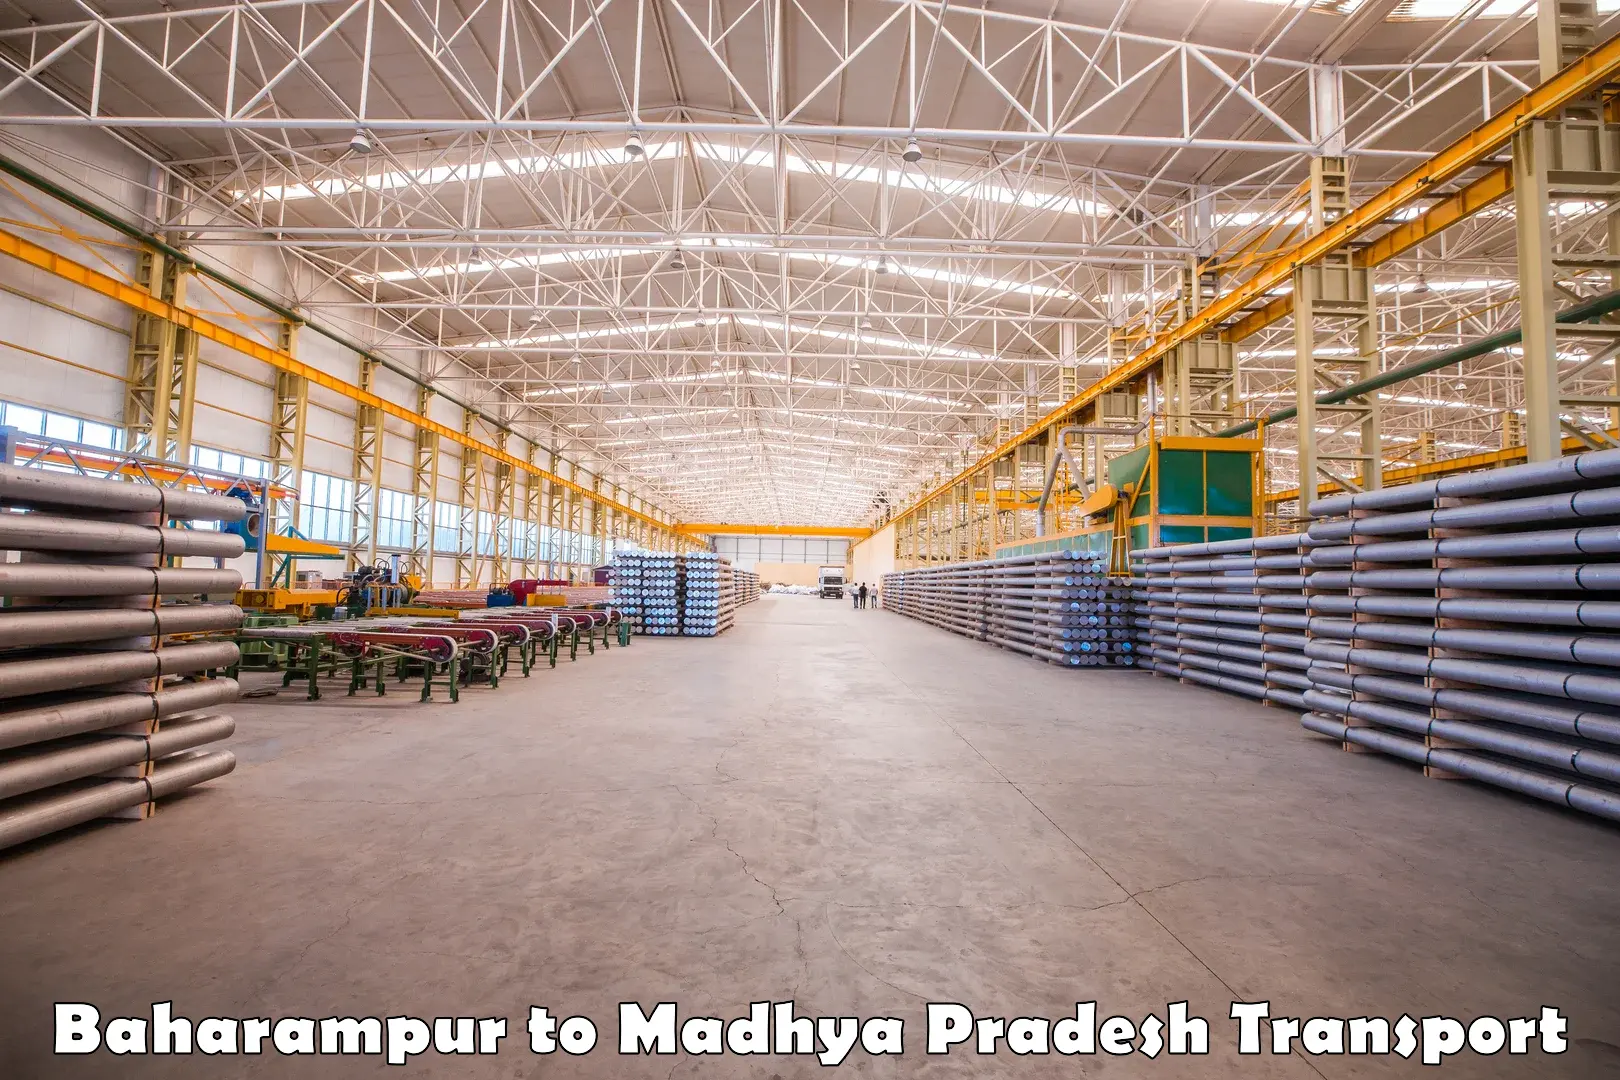 Truck transport companies in India Baharampur to IIT Indore